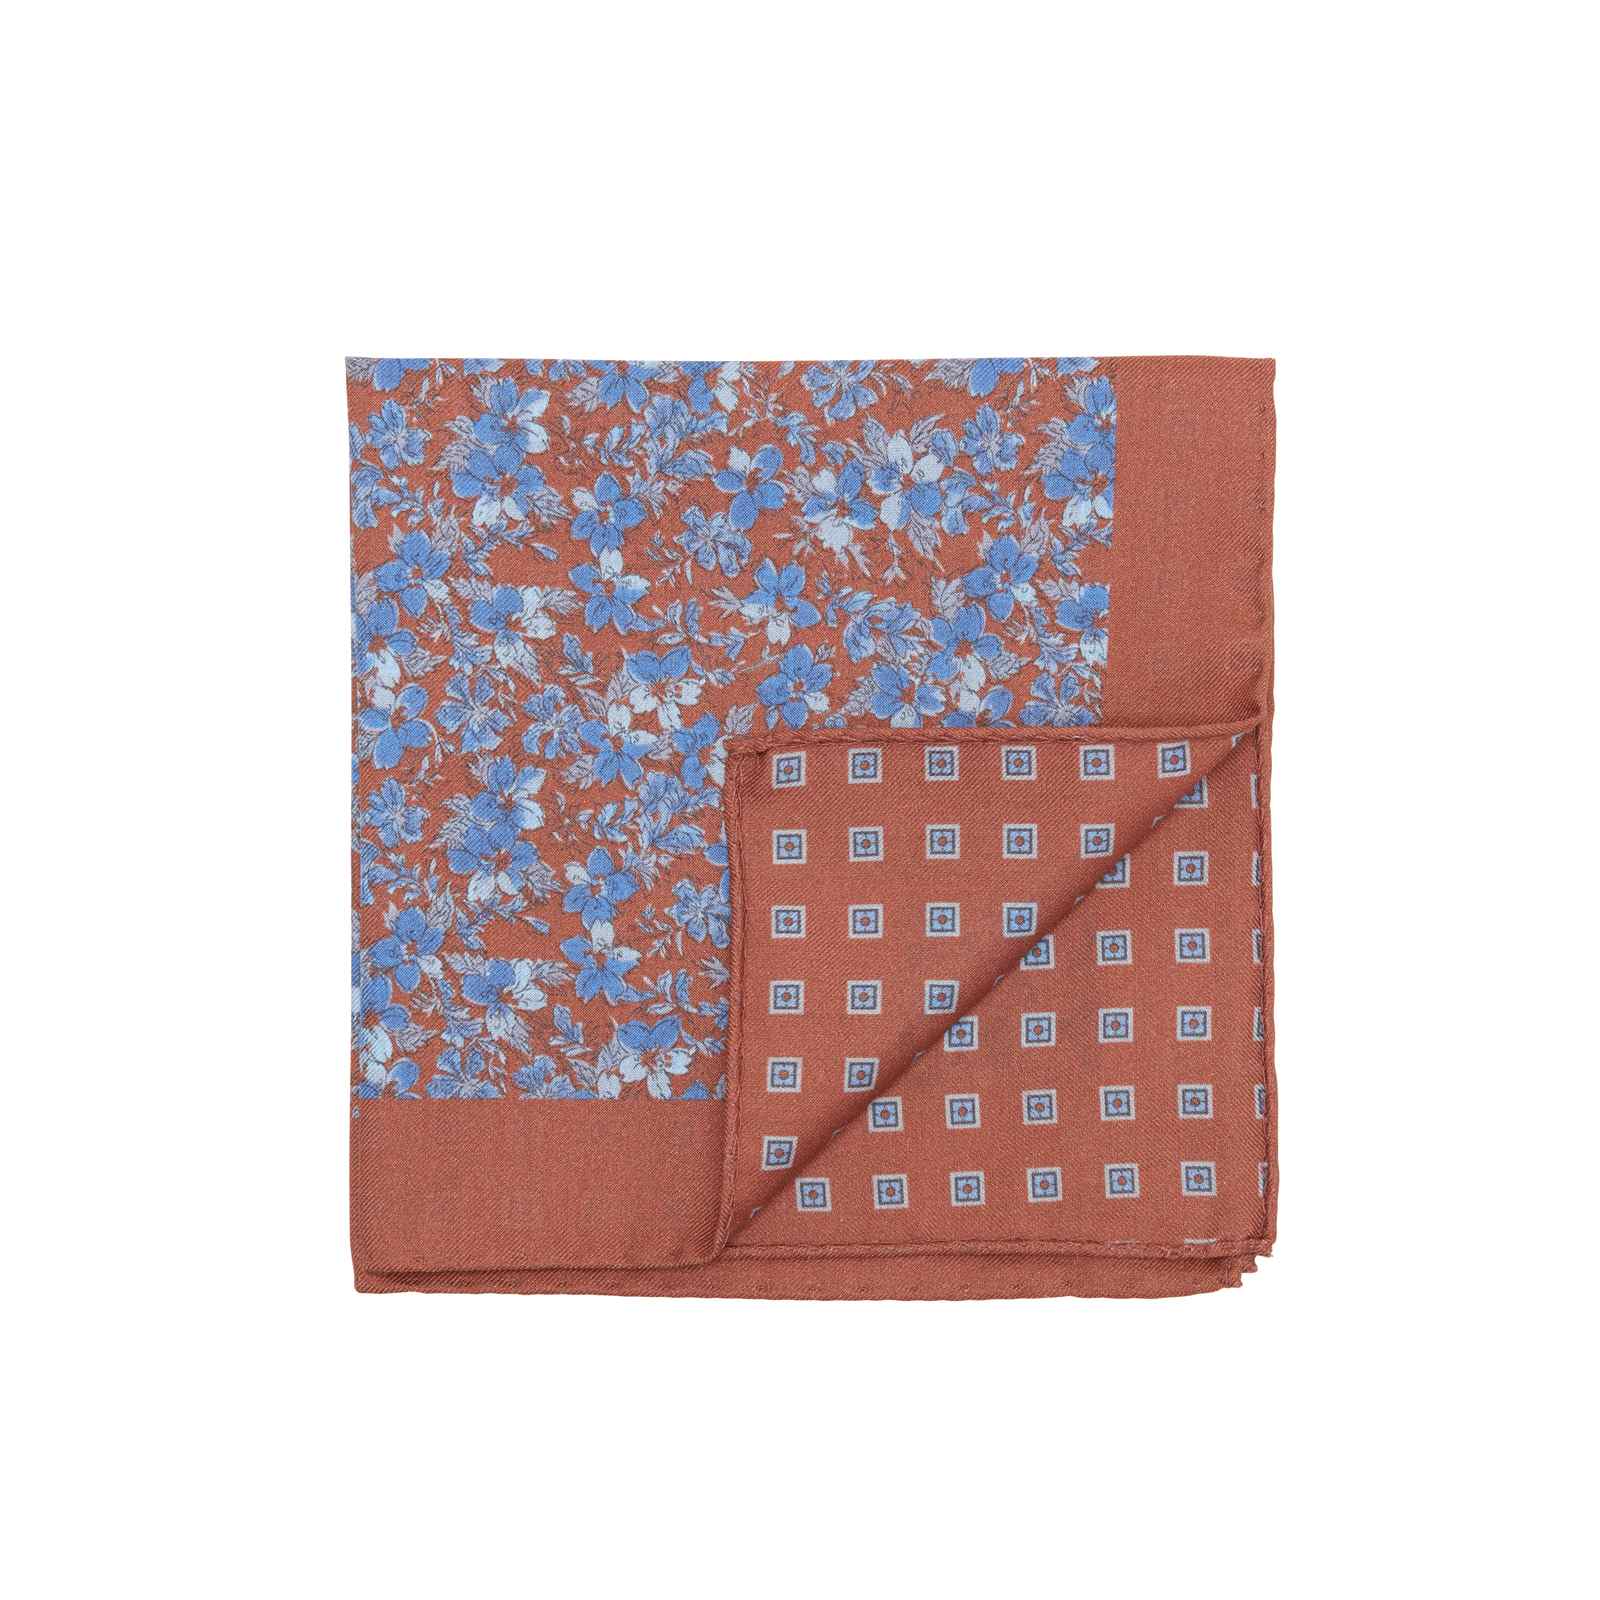 Burnt Orange and Blue Double Sided Flowers and Square Medallions Pocket Square